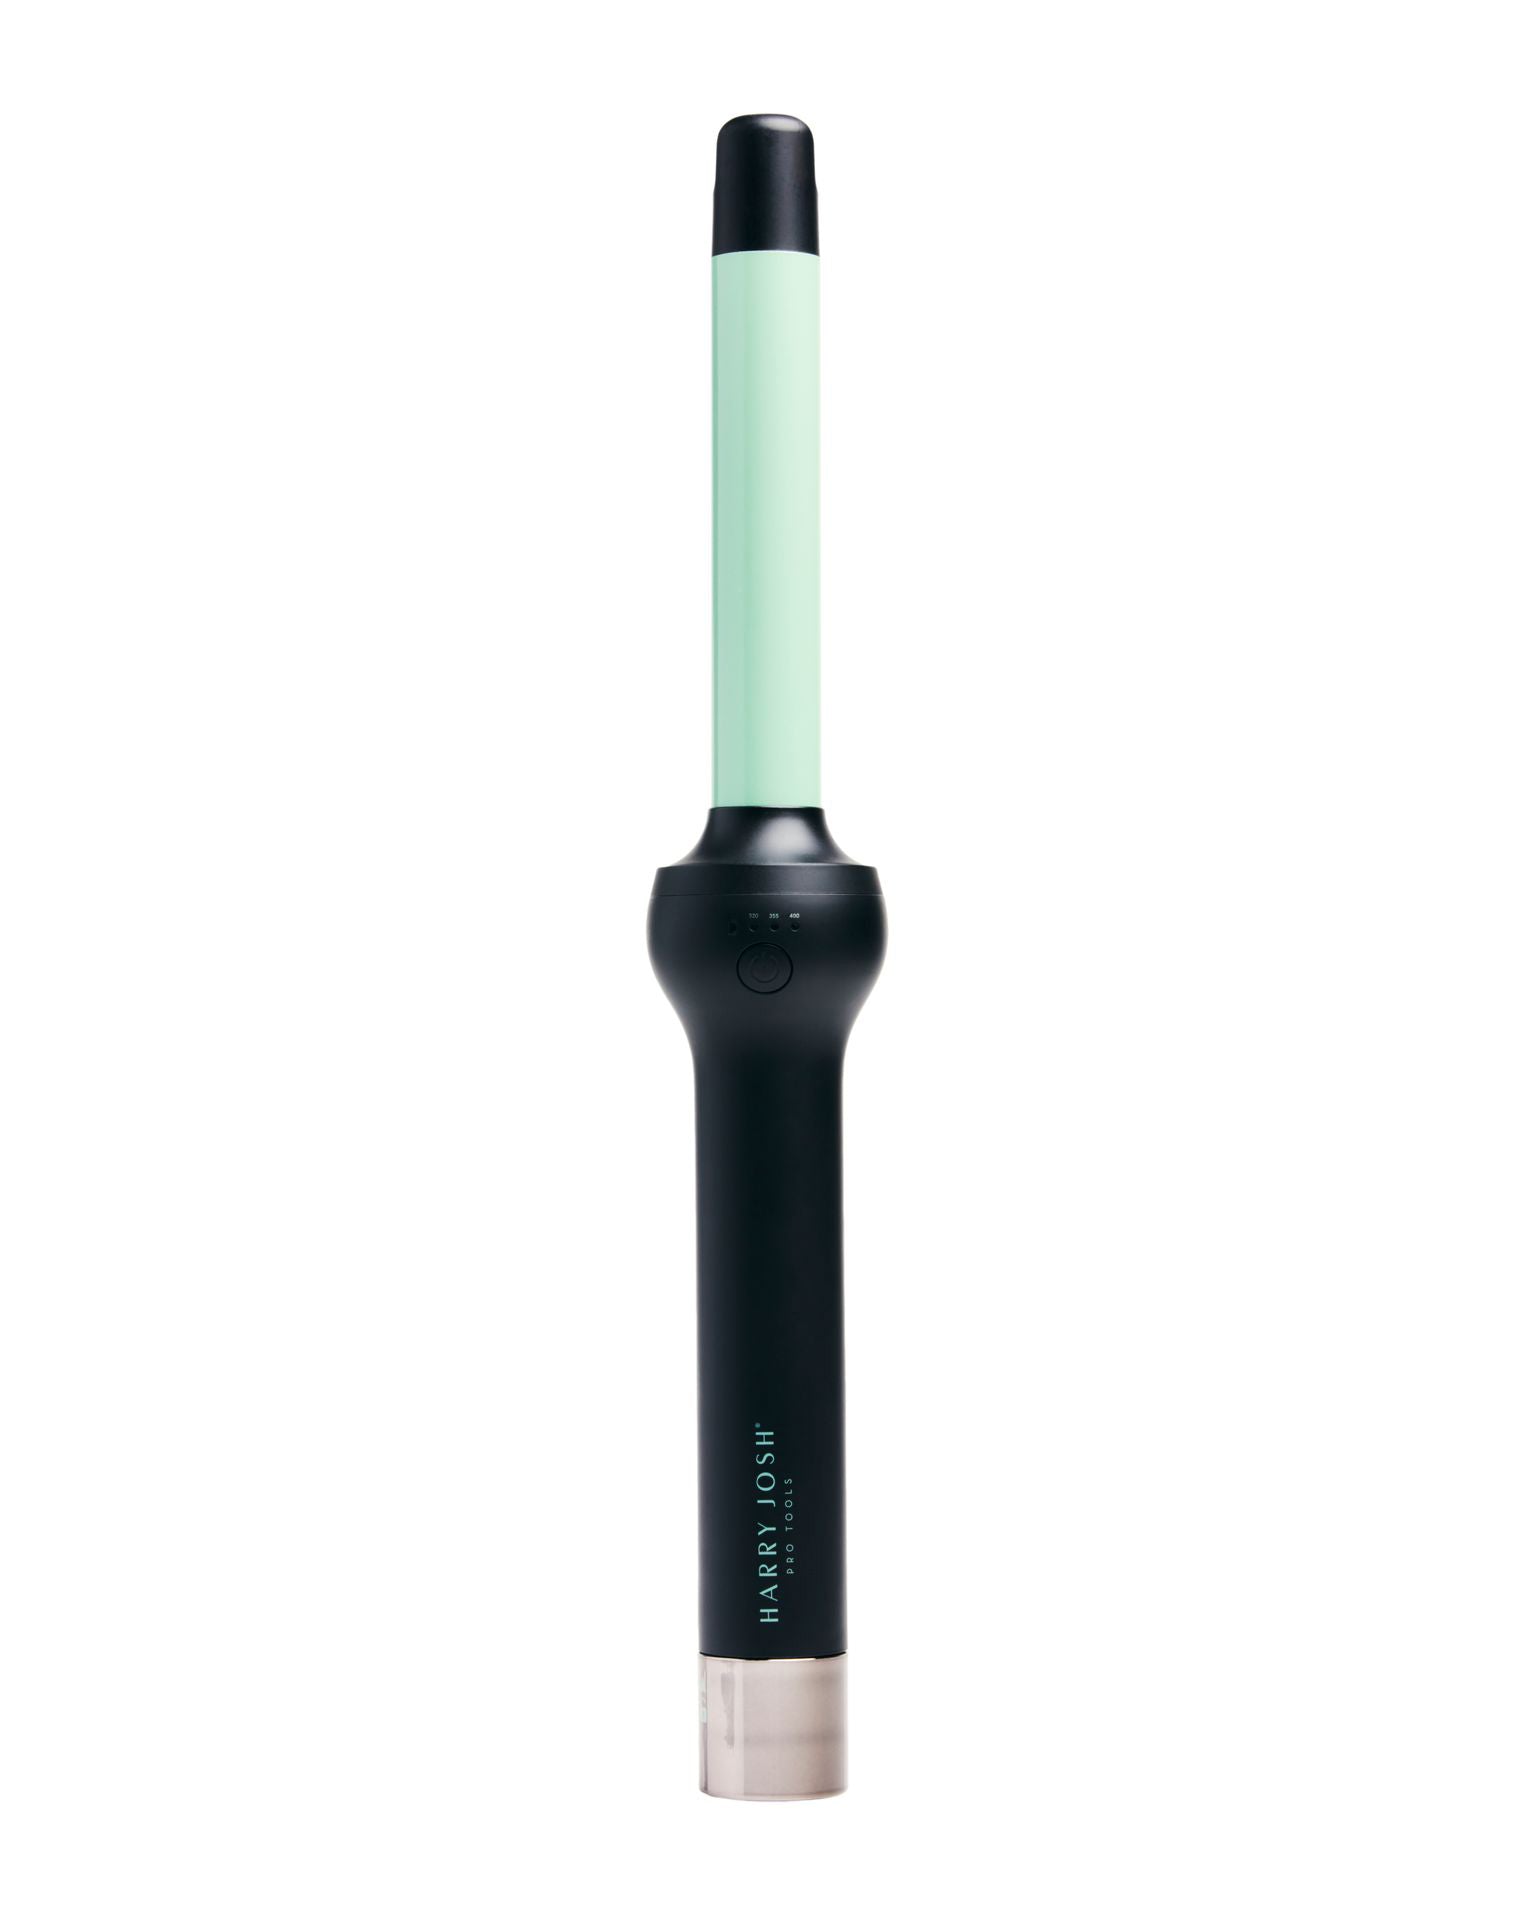 Image of Cordless Ceramic Curling Wand 1 Inch